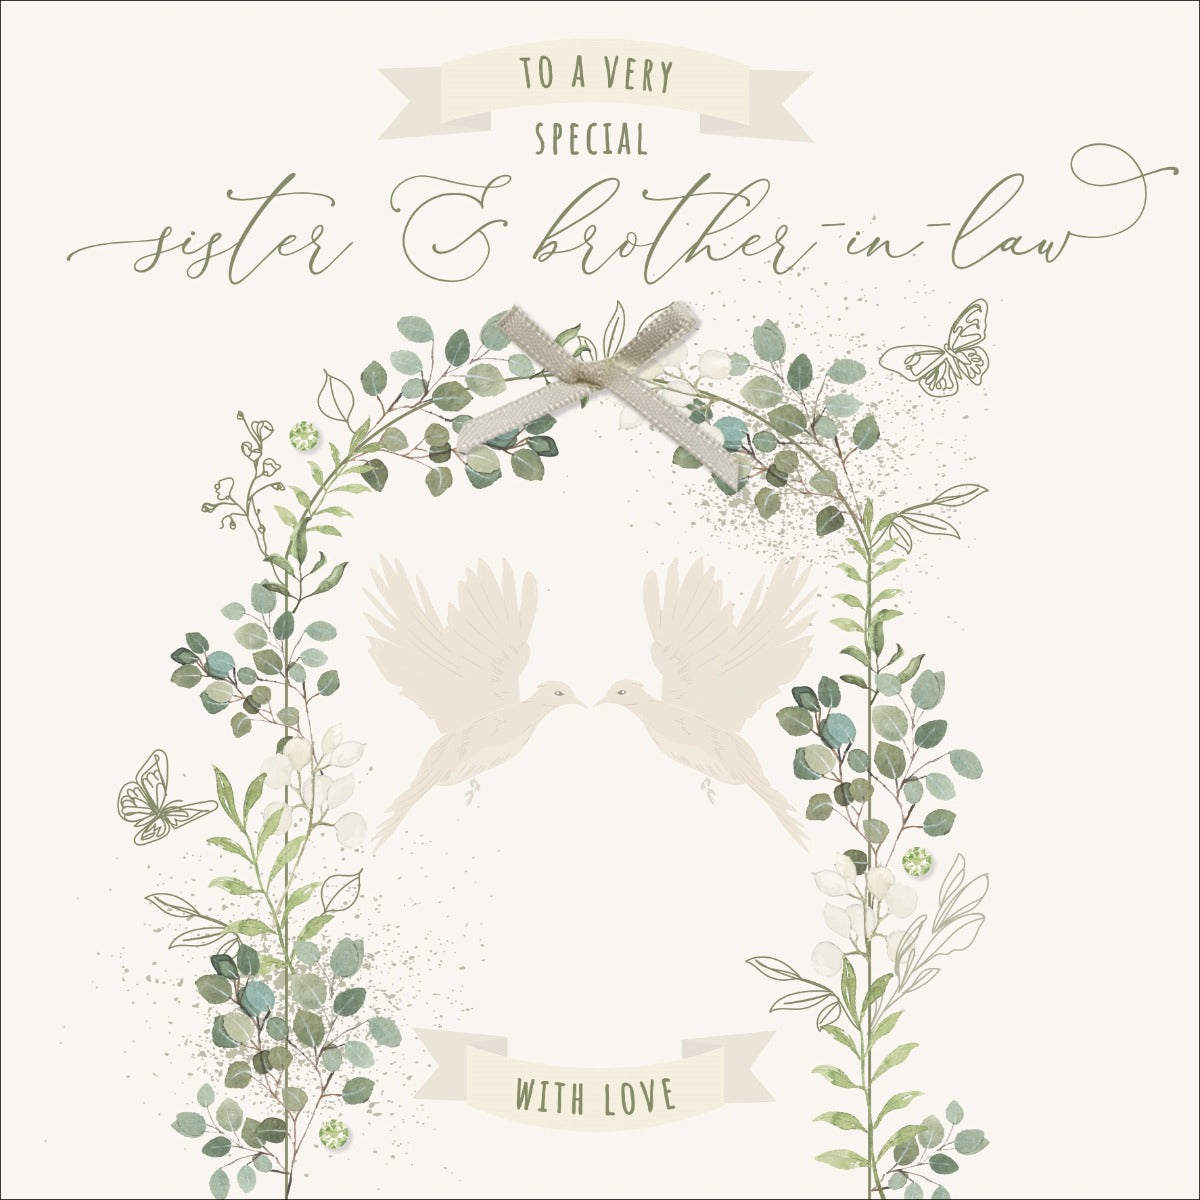 Sister & Brother-in-Law Wedding/Anniversary Botanical Card